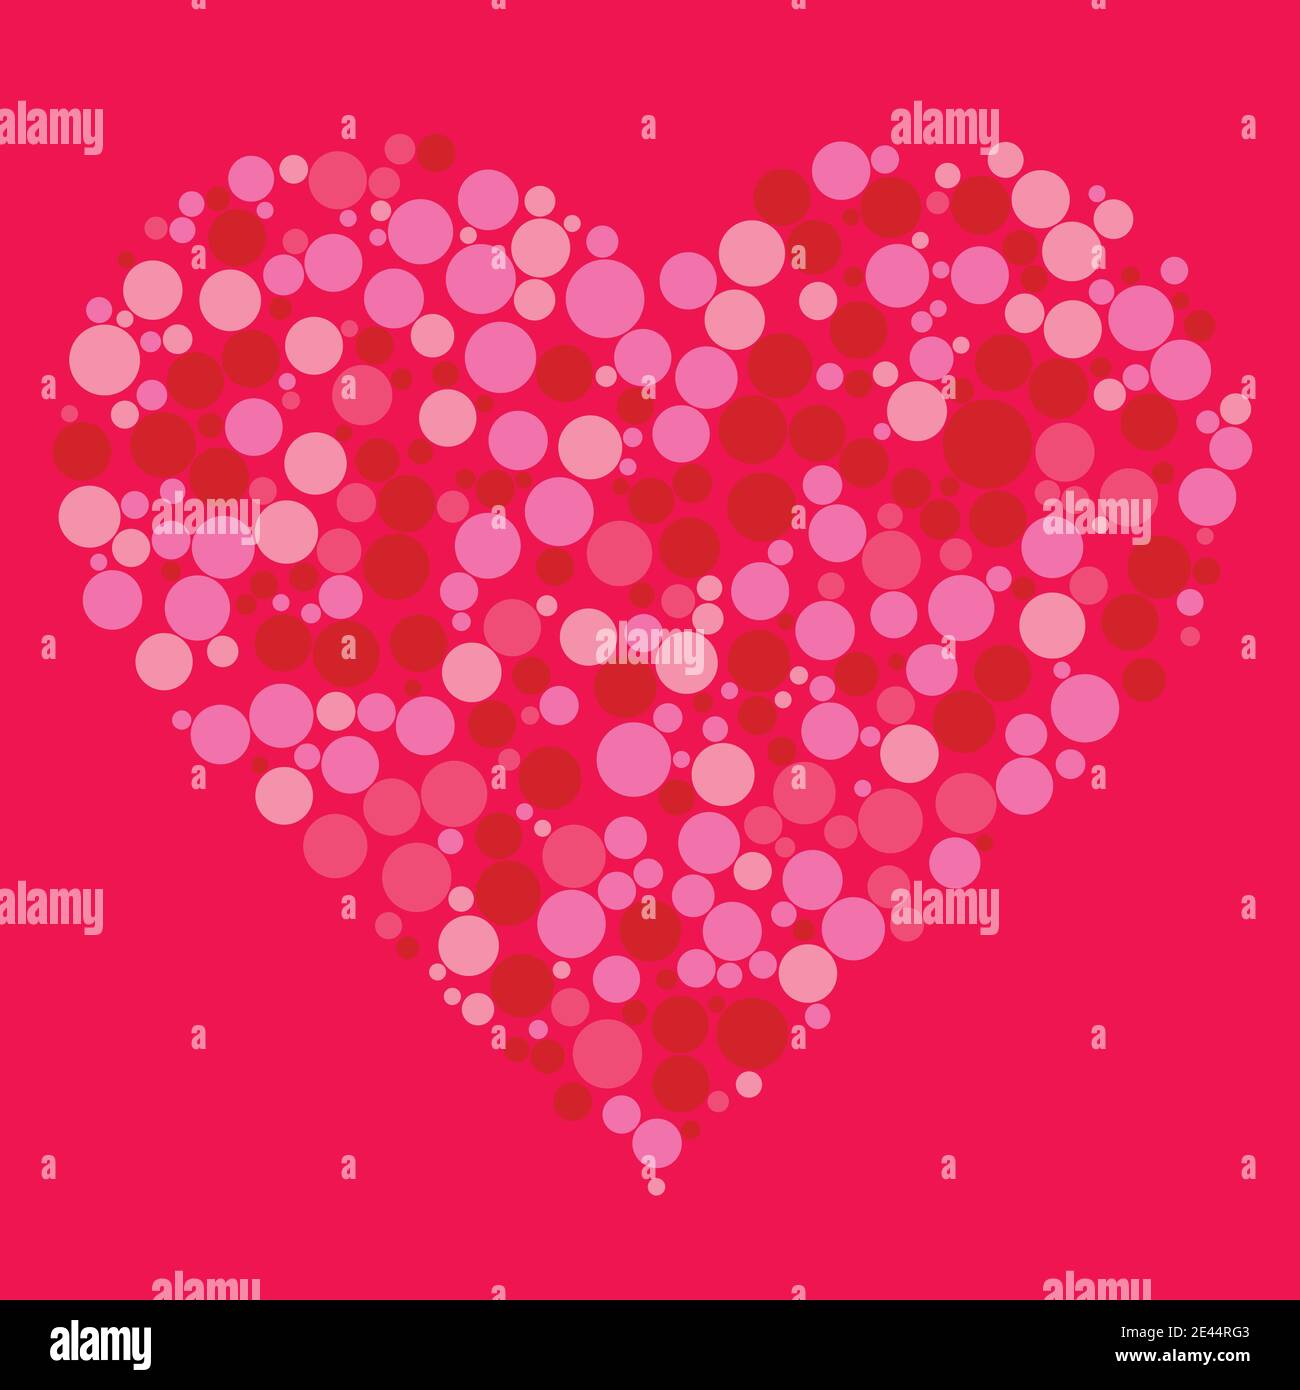 Love is blind. Conceptual vector illustration with heart shape made of dots. Stock Vector